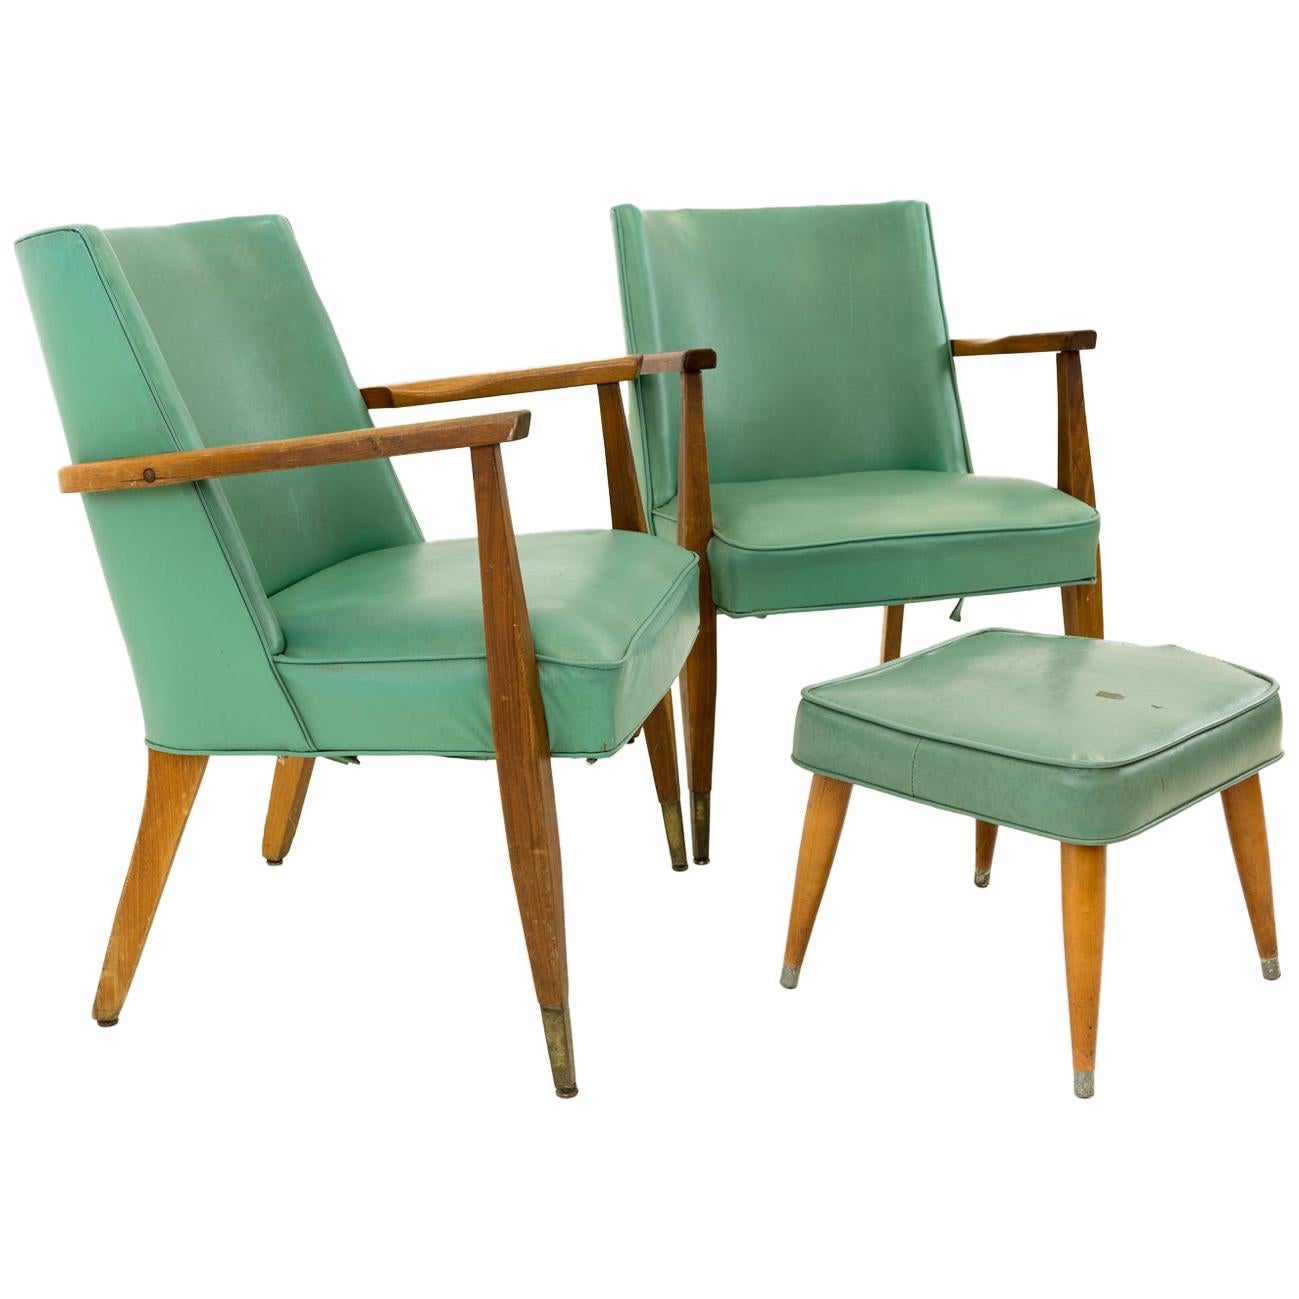 Kroehler Midcentury Occasional Lounge Chairs, Pair